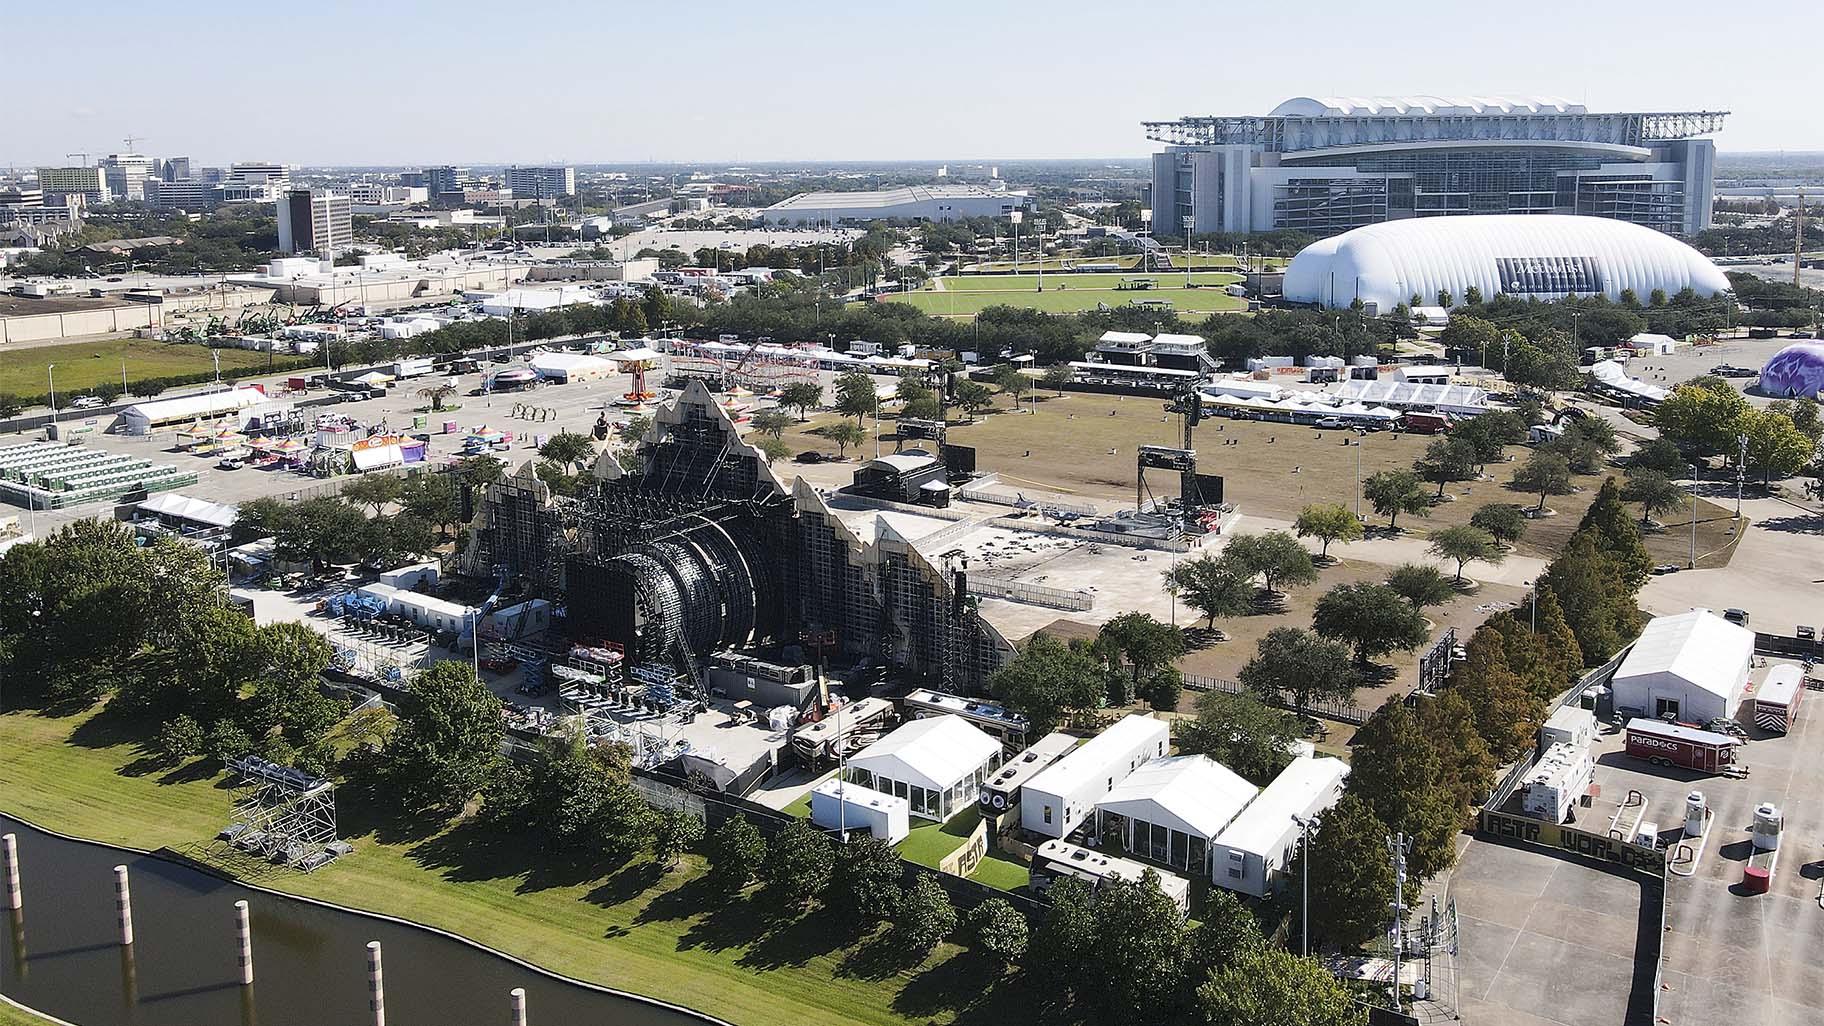 A drone image shows the stage area at Astroworld on Saturday, Nov. 6, 2021 in Houston. Several people died and numerous others were injured in what officials described as a surge of the crowd at the music festival while Travis Scott was performing Friday night. (Elizabeth Conley / Houston Chronicle via AP)